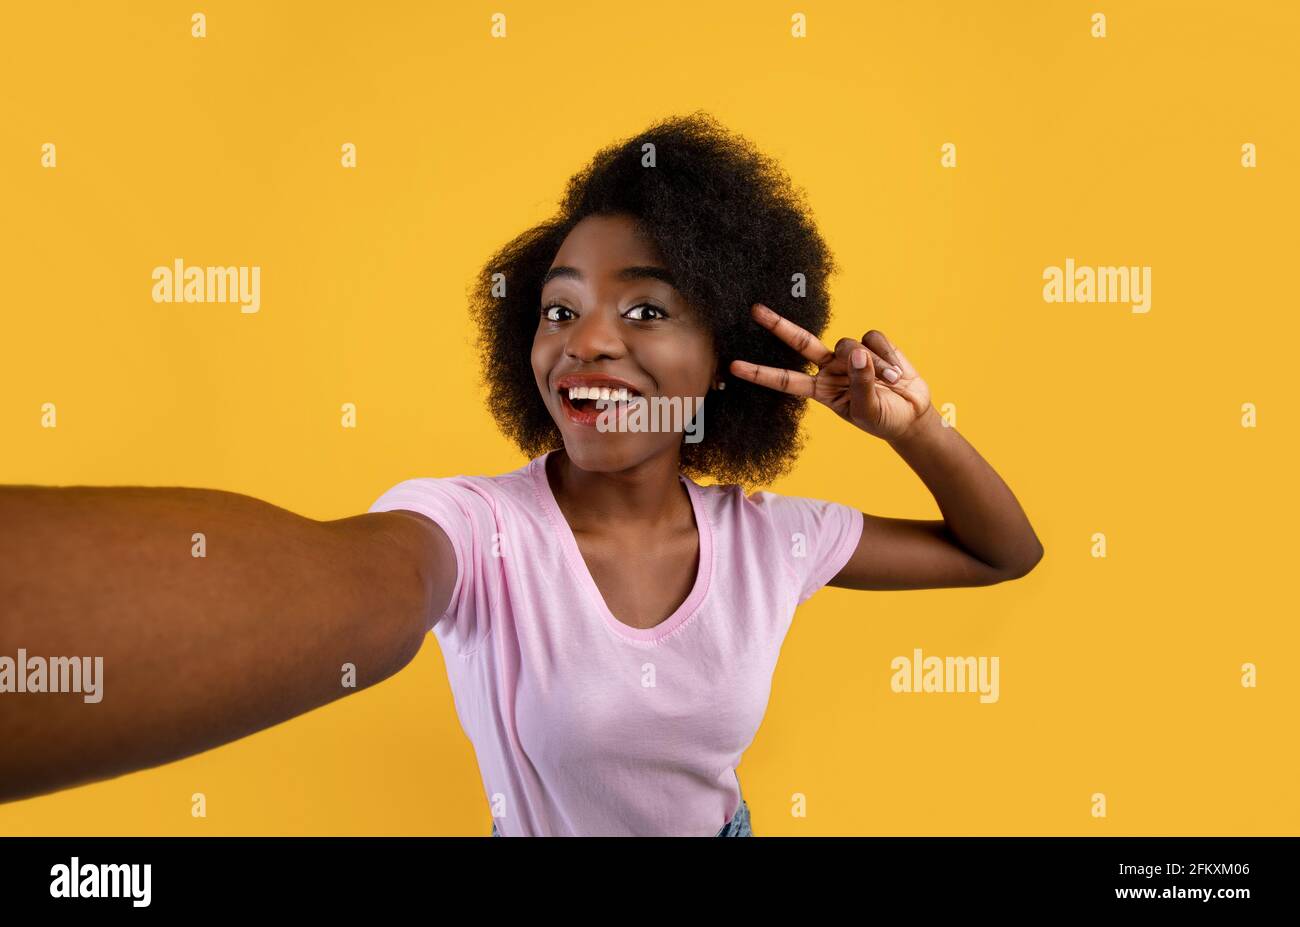 Positive african american woman taking selfie and showing peace gesture, smiling at camera over yellow background Stock Photo